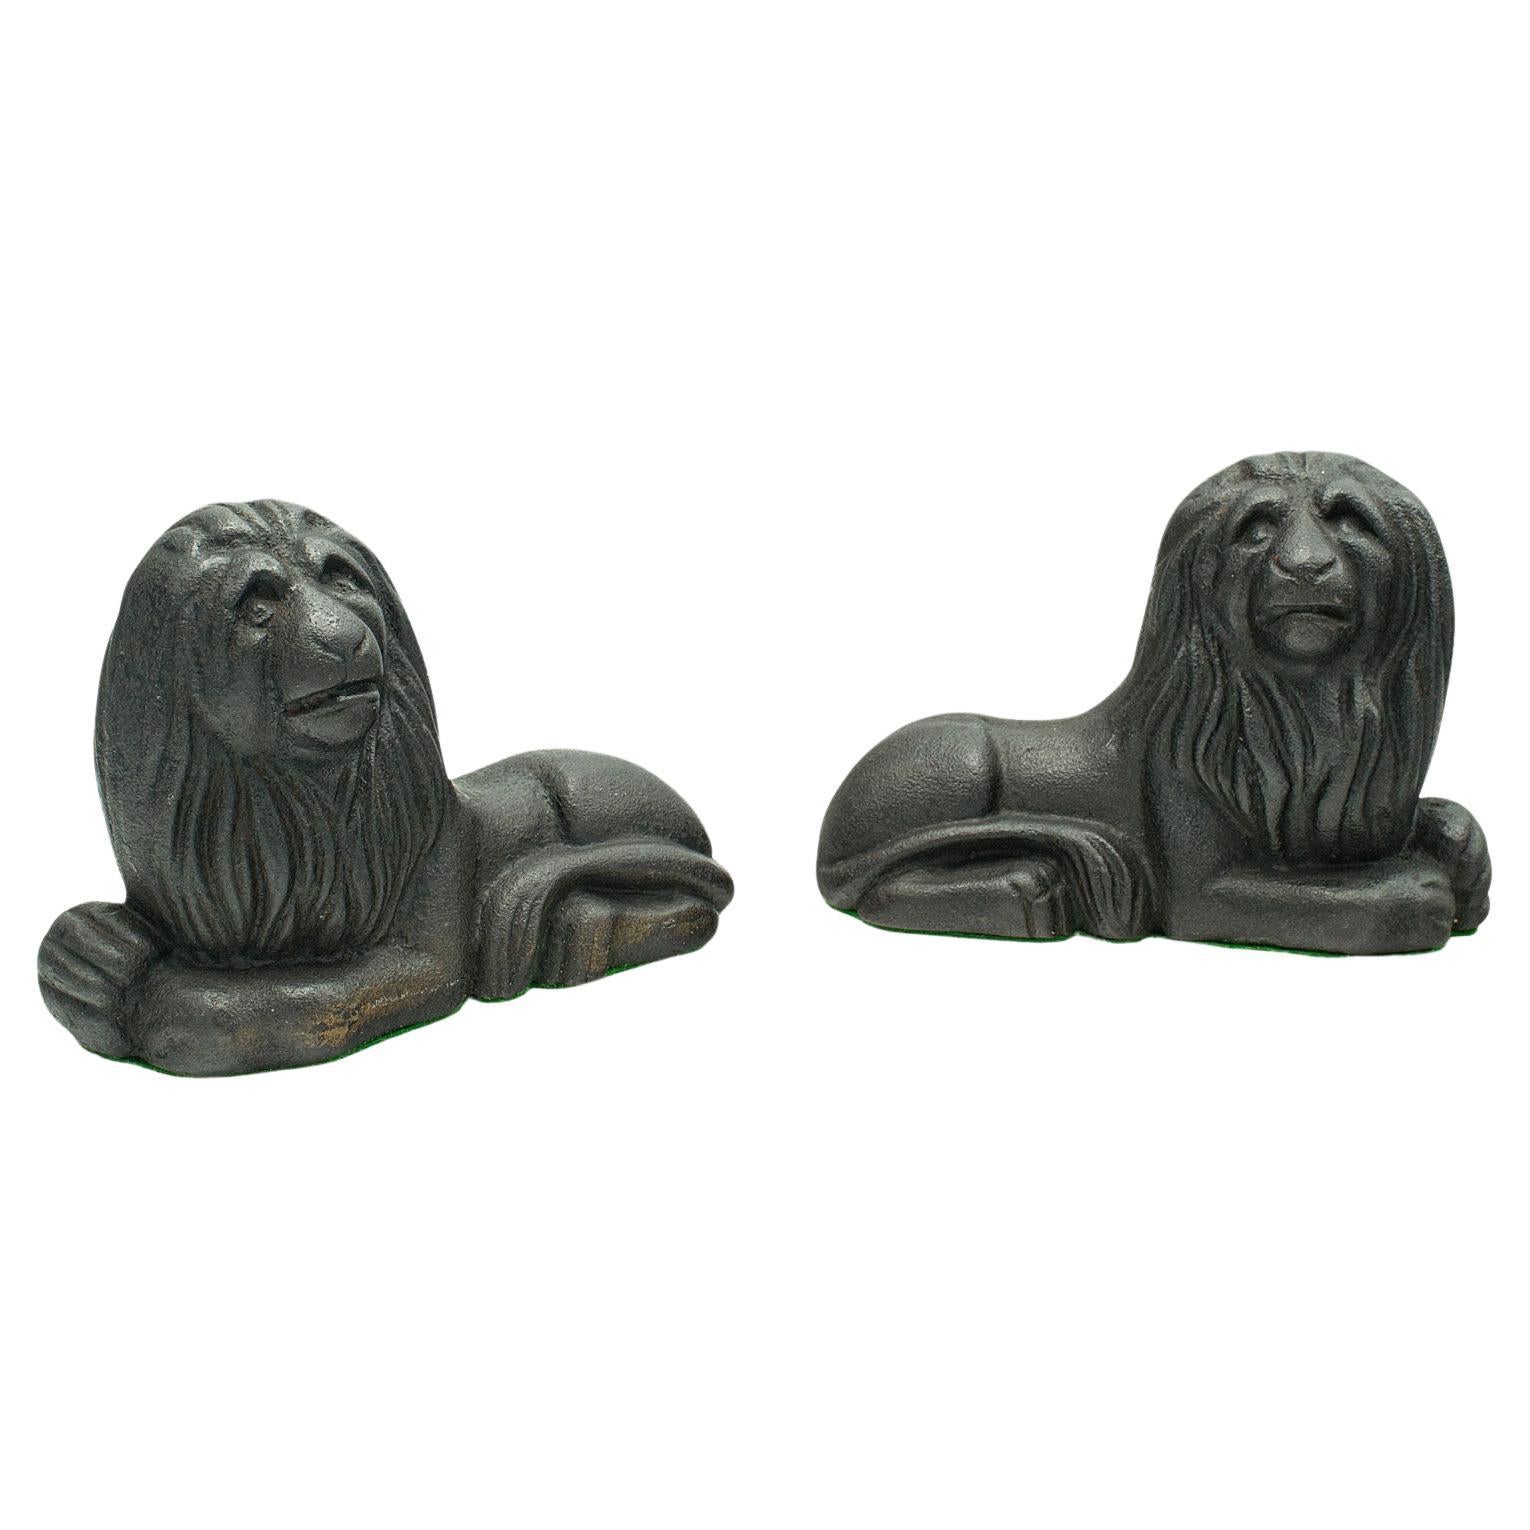 Pair of Antique Lion Bookends, English, Cast Iron, Decor, Book Rest, Victorian For Sale